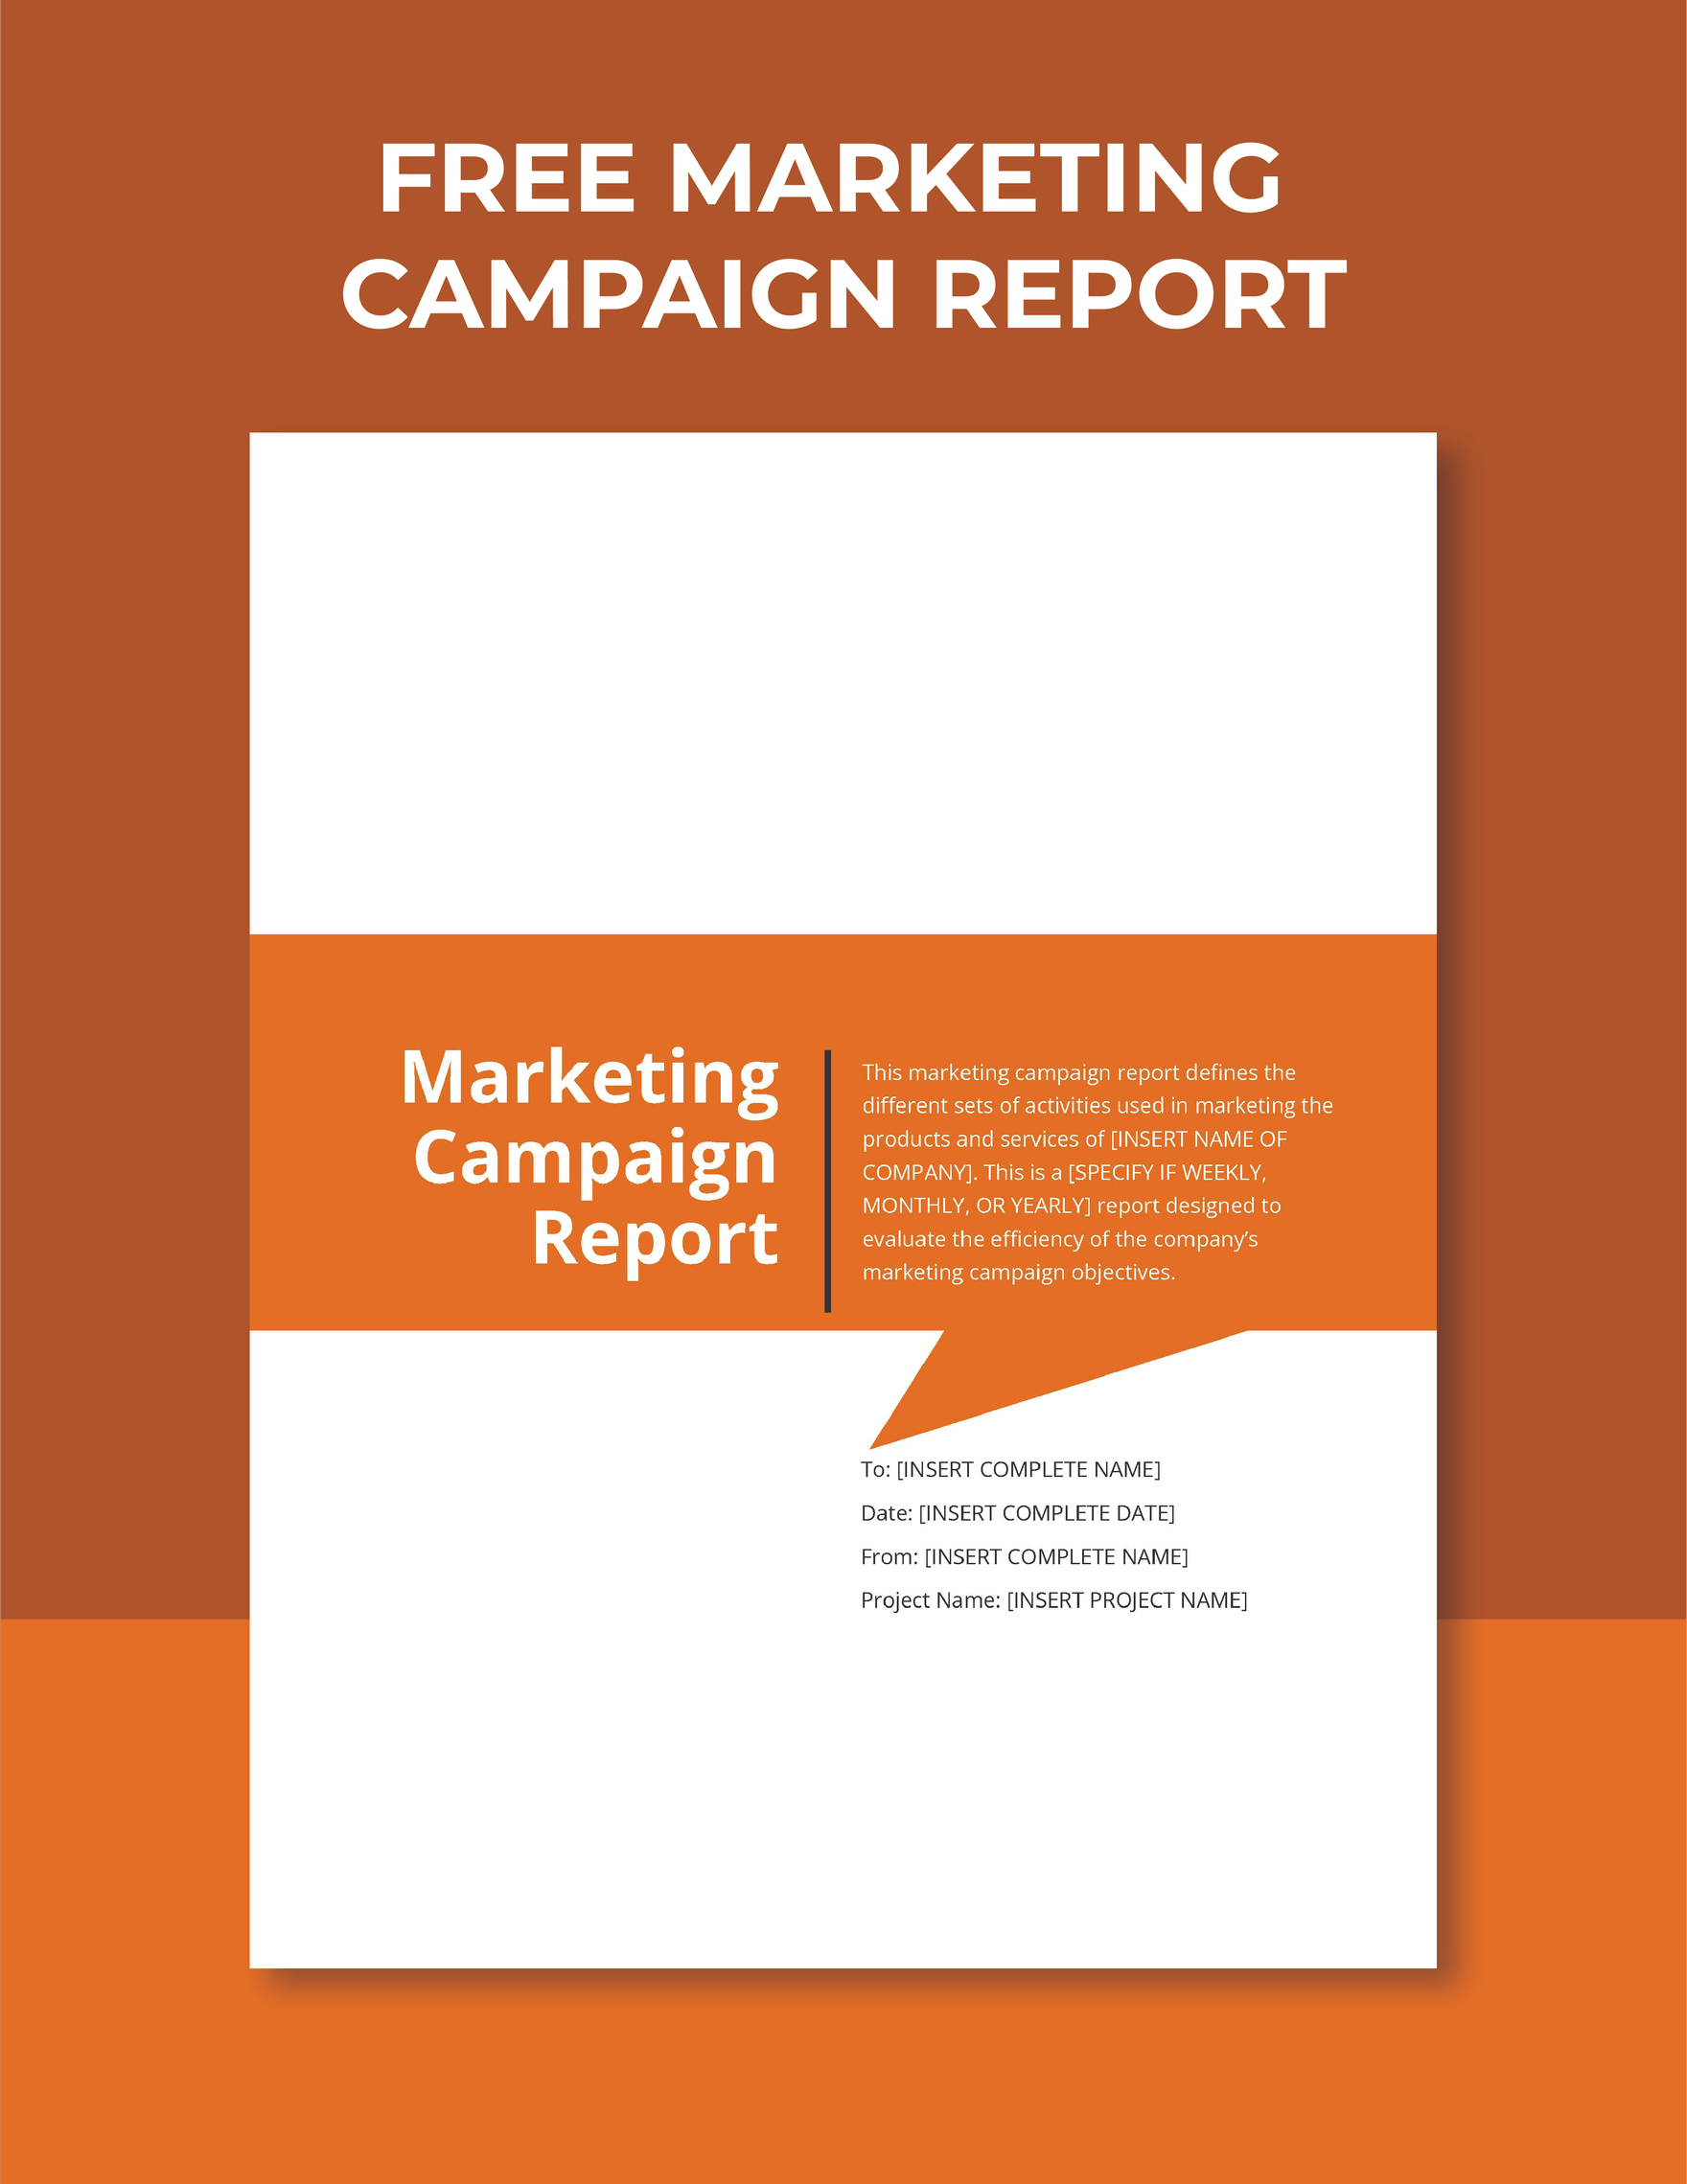 Marketing Campaign Report Template in Word, Google Docs, Apple Pages